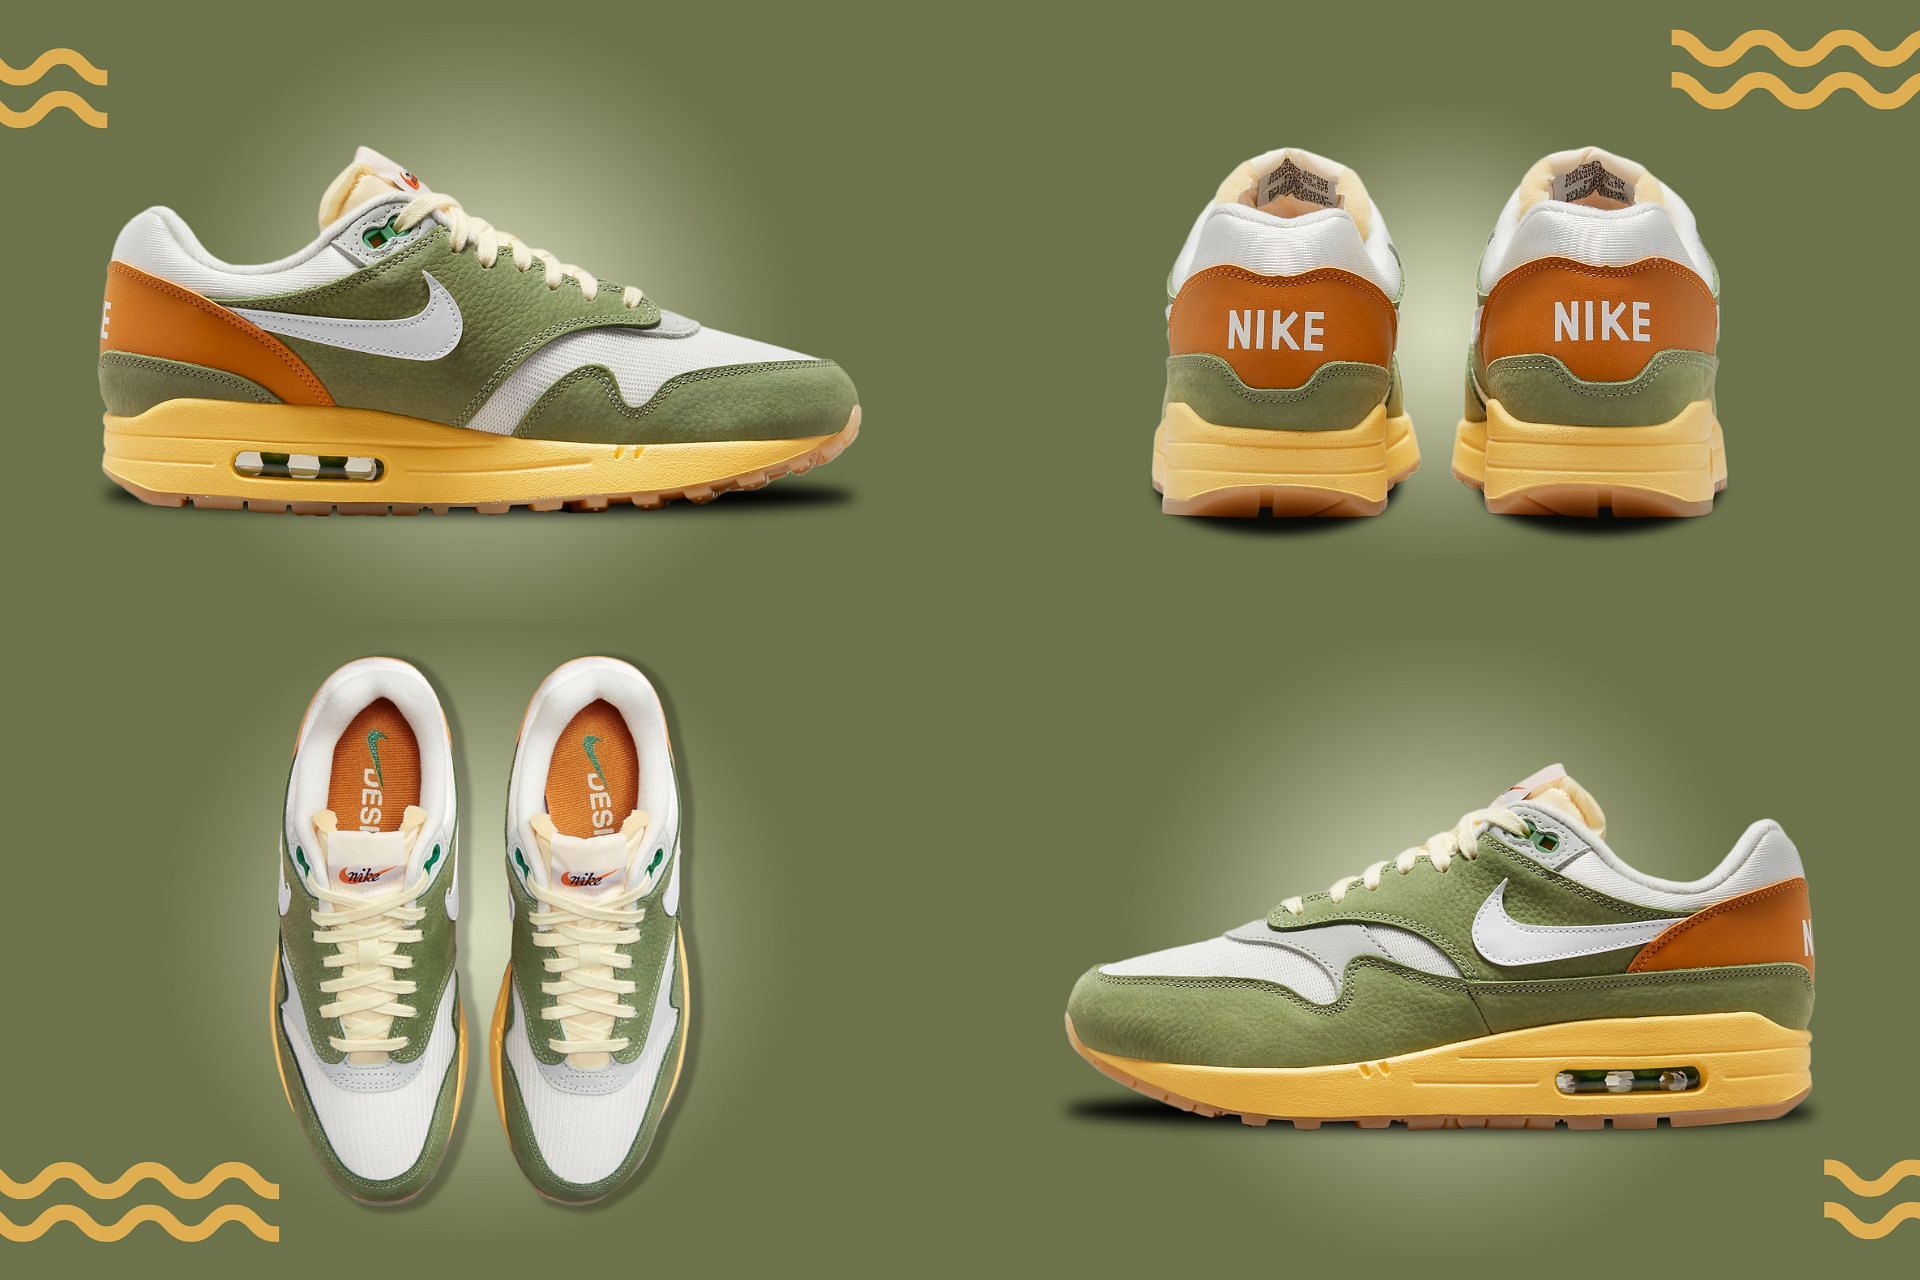 The upcoming Nike Air Max 1 &quot;Design by Japan&quot; sneakers will be released exclusively in Japan. (Image via Sportskeeda)